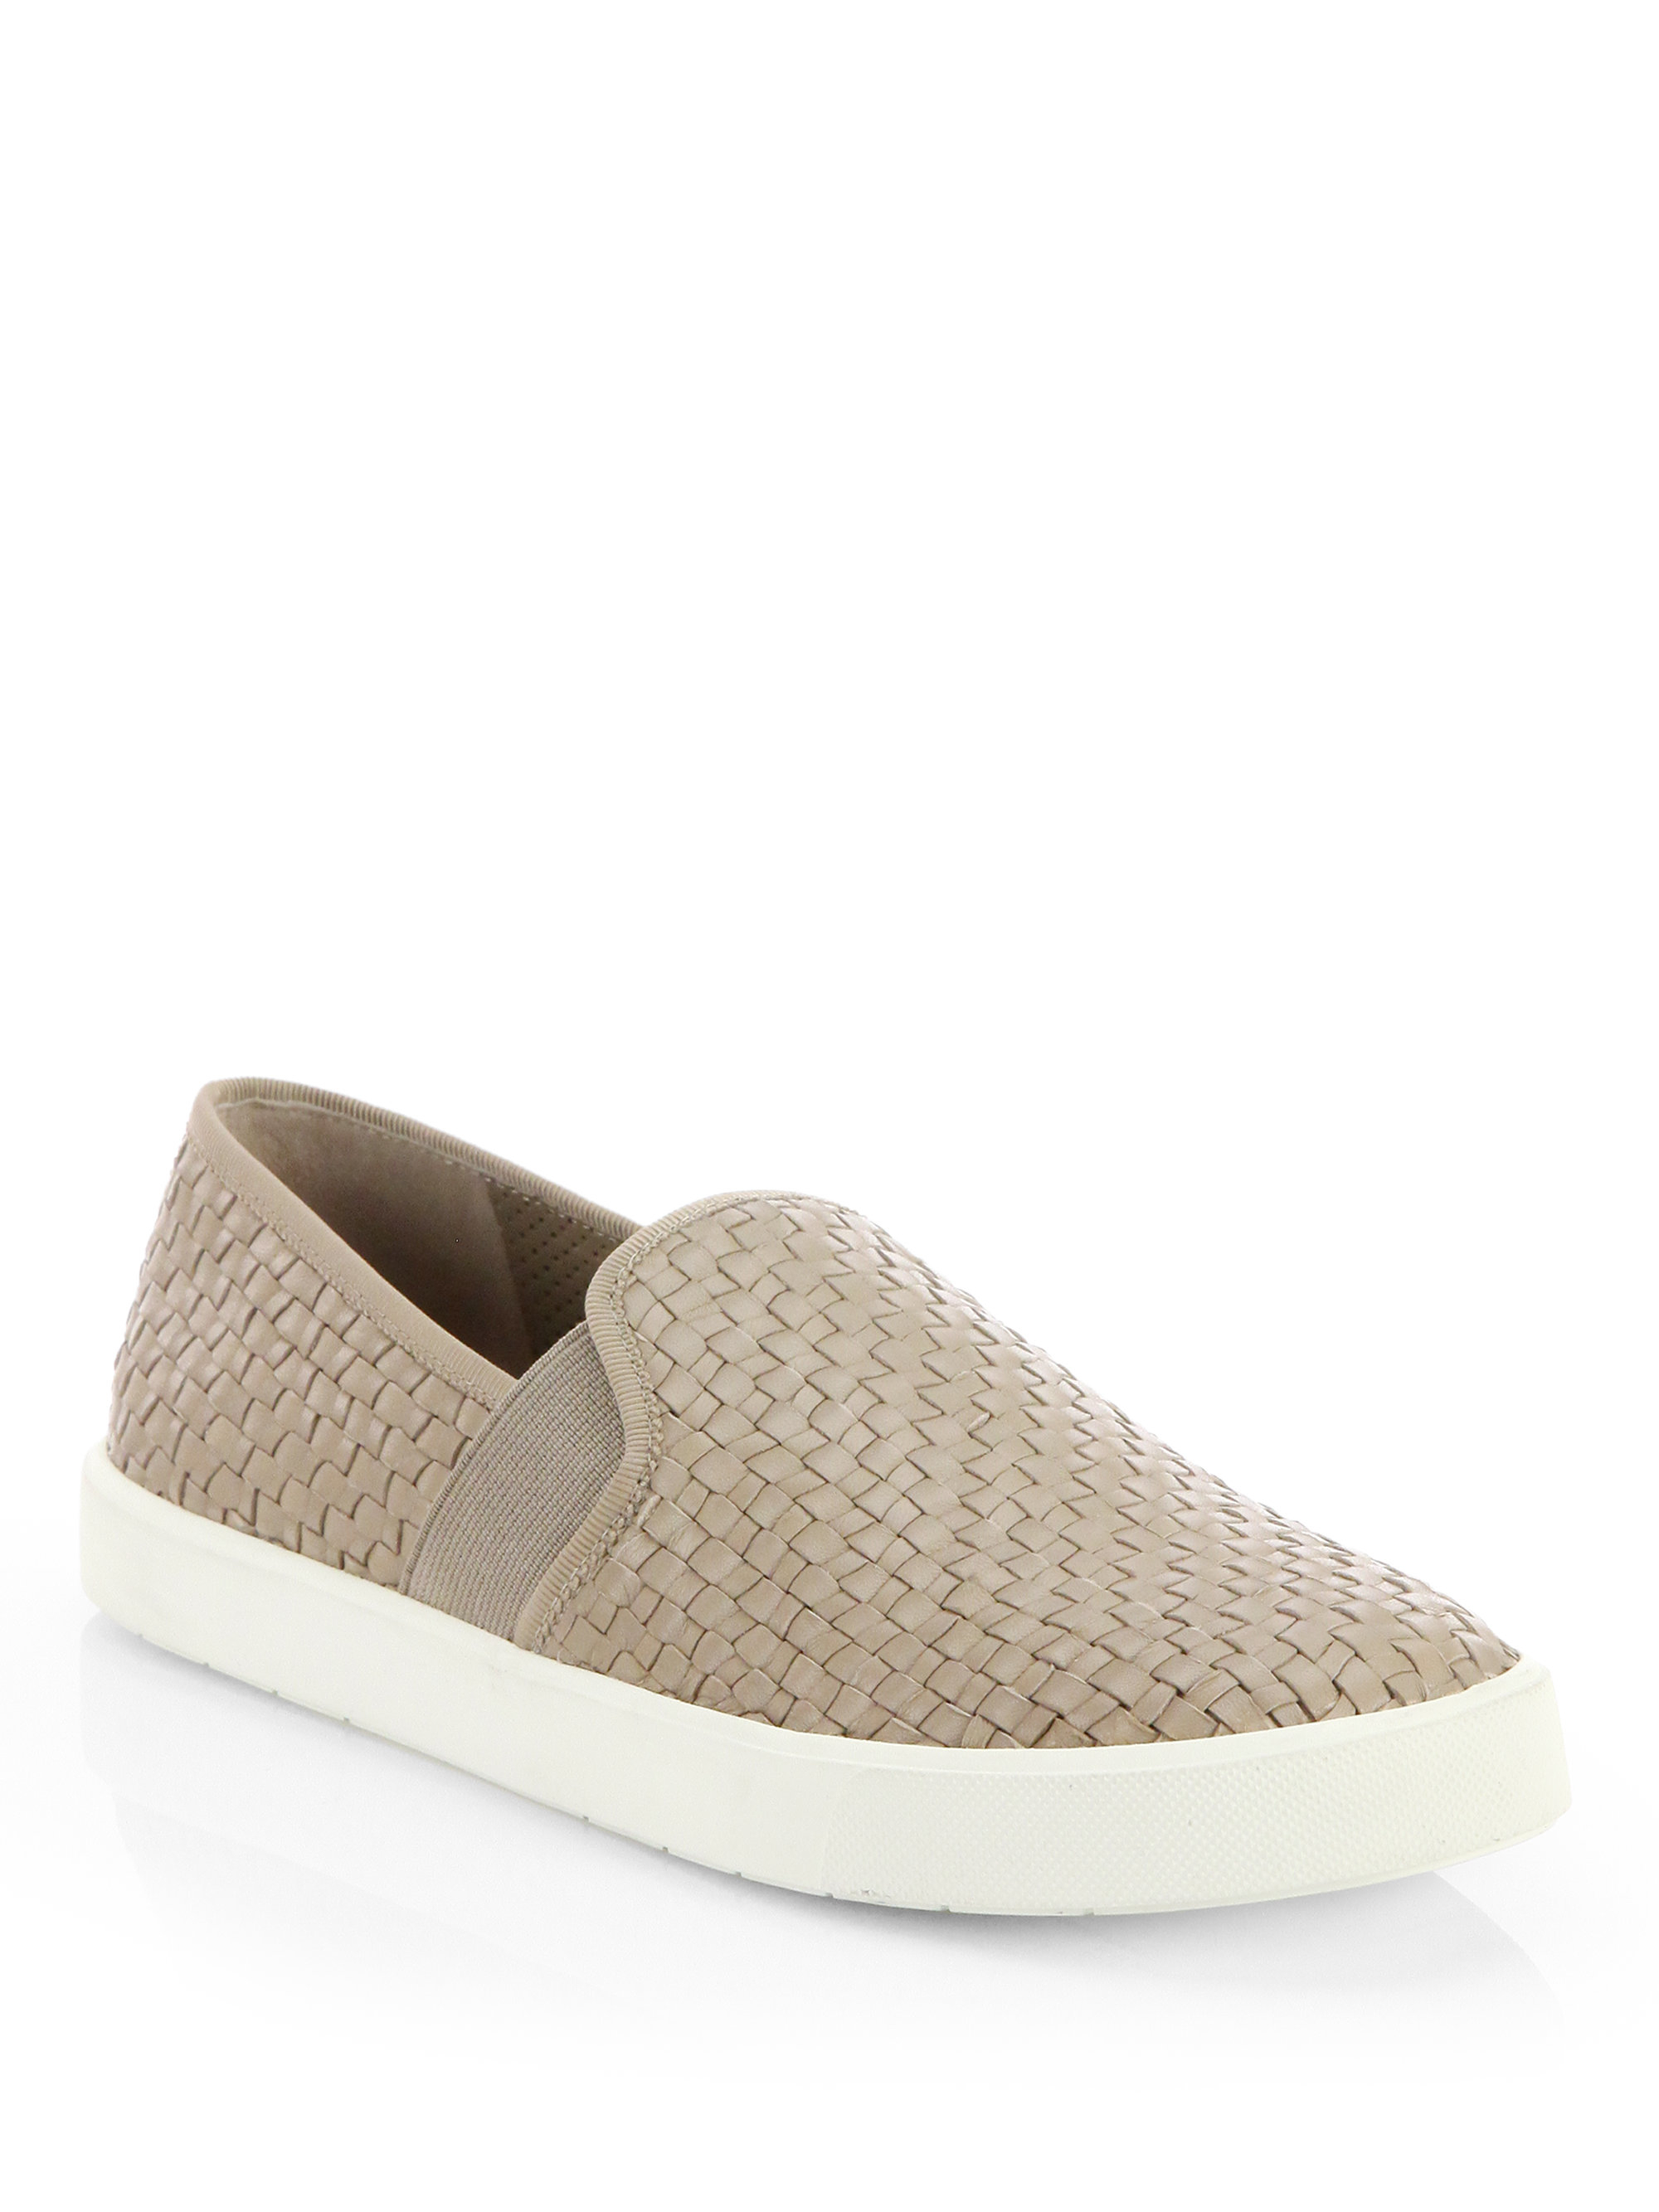 Vince Preston Woven Leather Slip-on Sneakers in Brown | Lyst